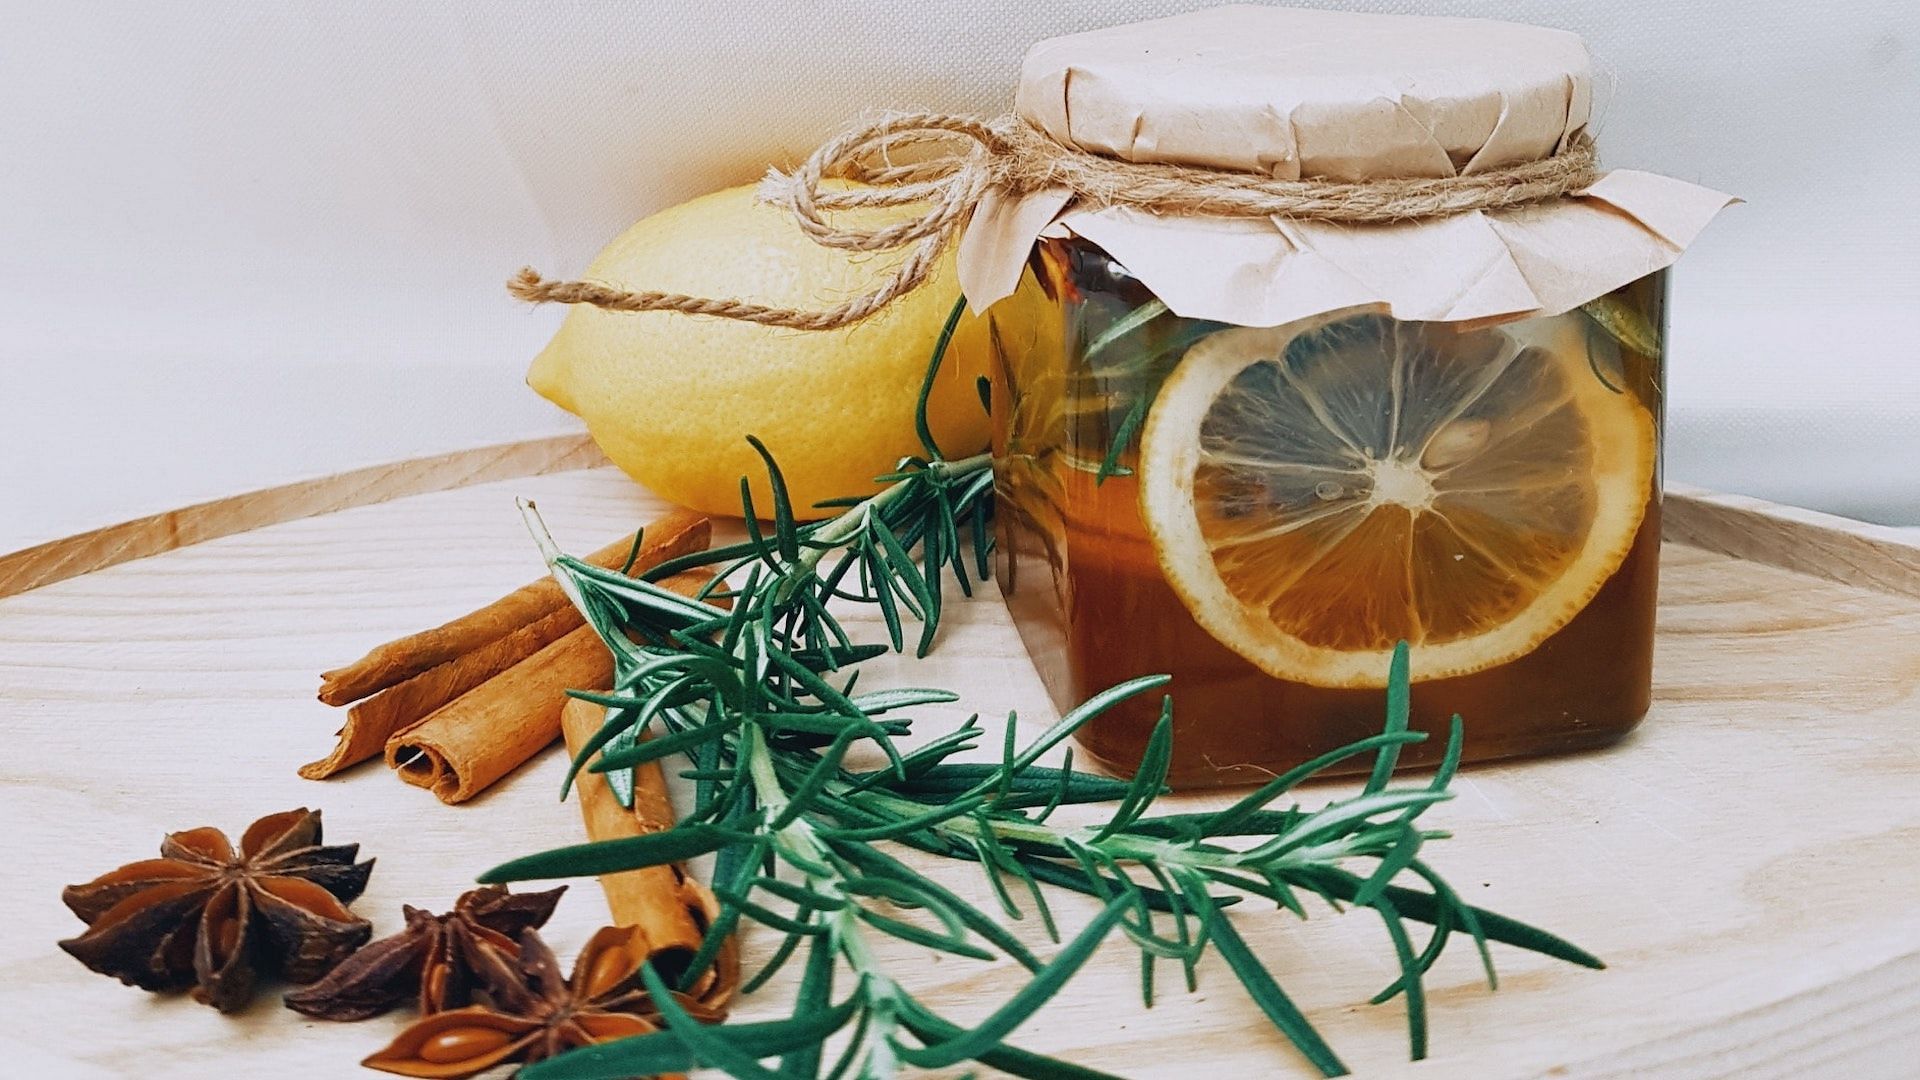 Honey or agave? Natural sweeteners are on the rise. Image via Pexels/Vicky Tran